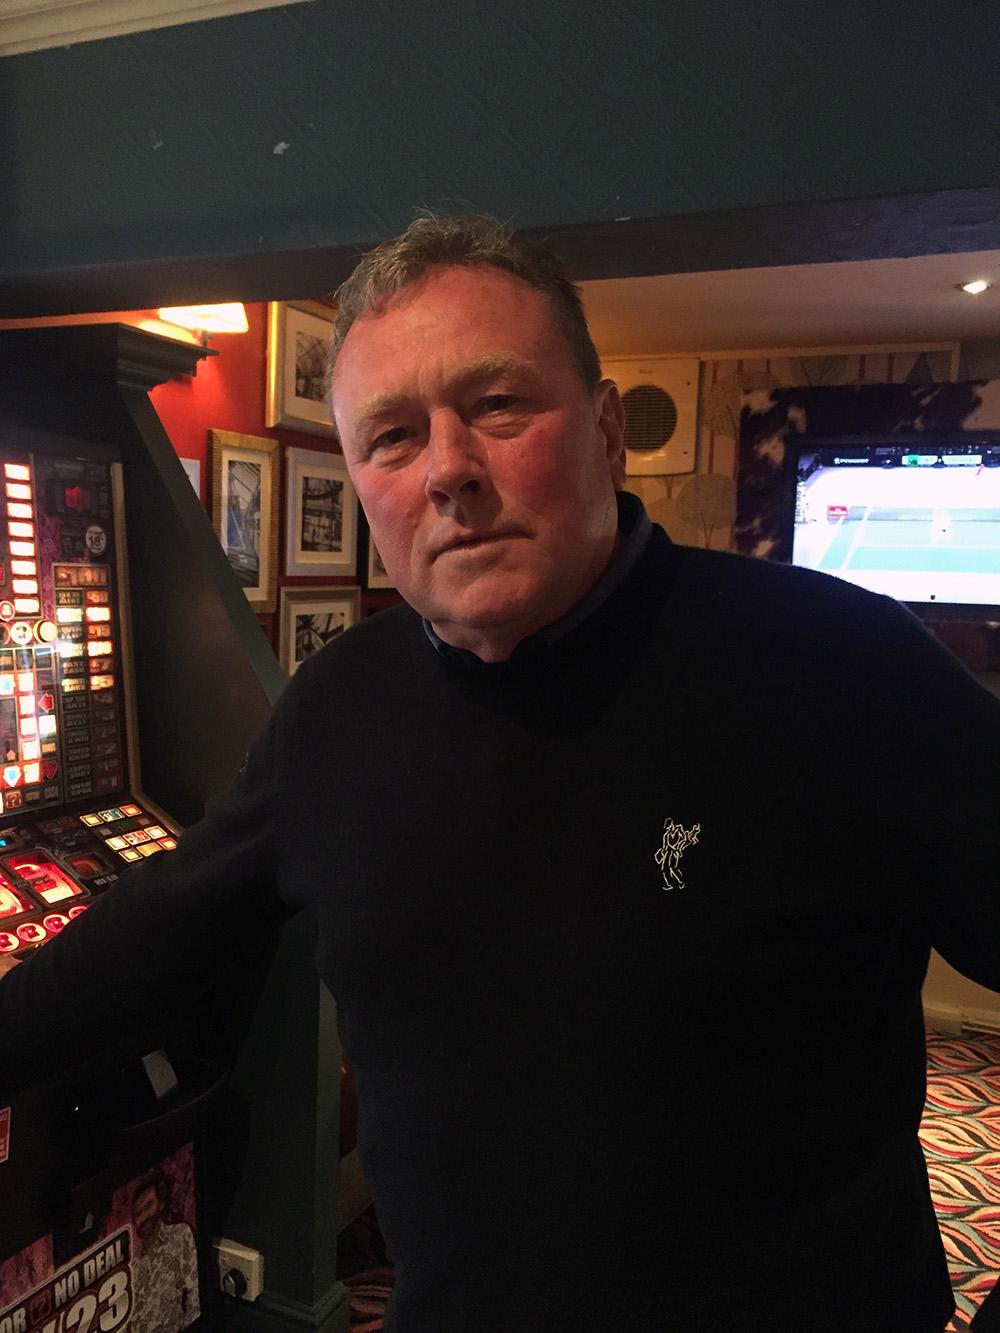 Alan Arthur, 58, a publican, from Romsey said, "Tell FIFA to go and do one. I don't agree with it at all."